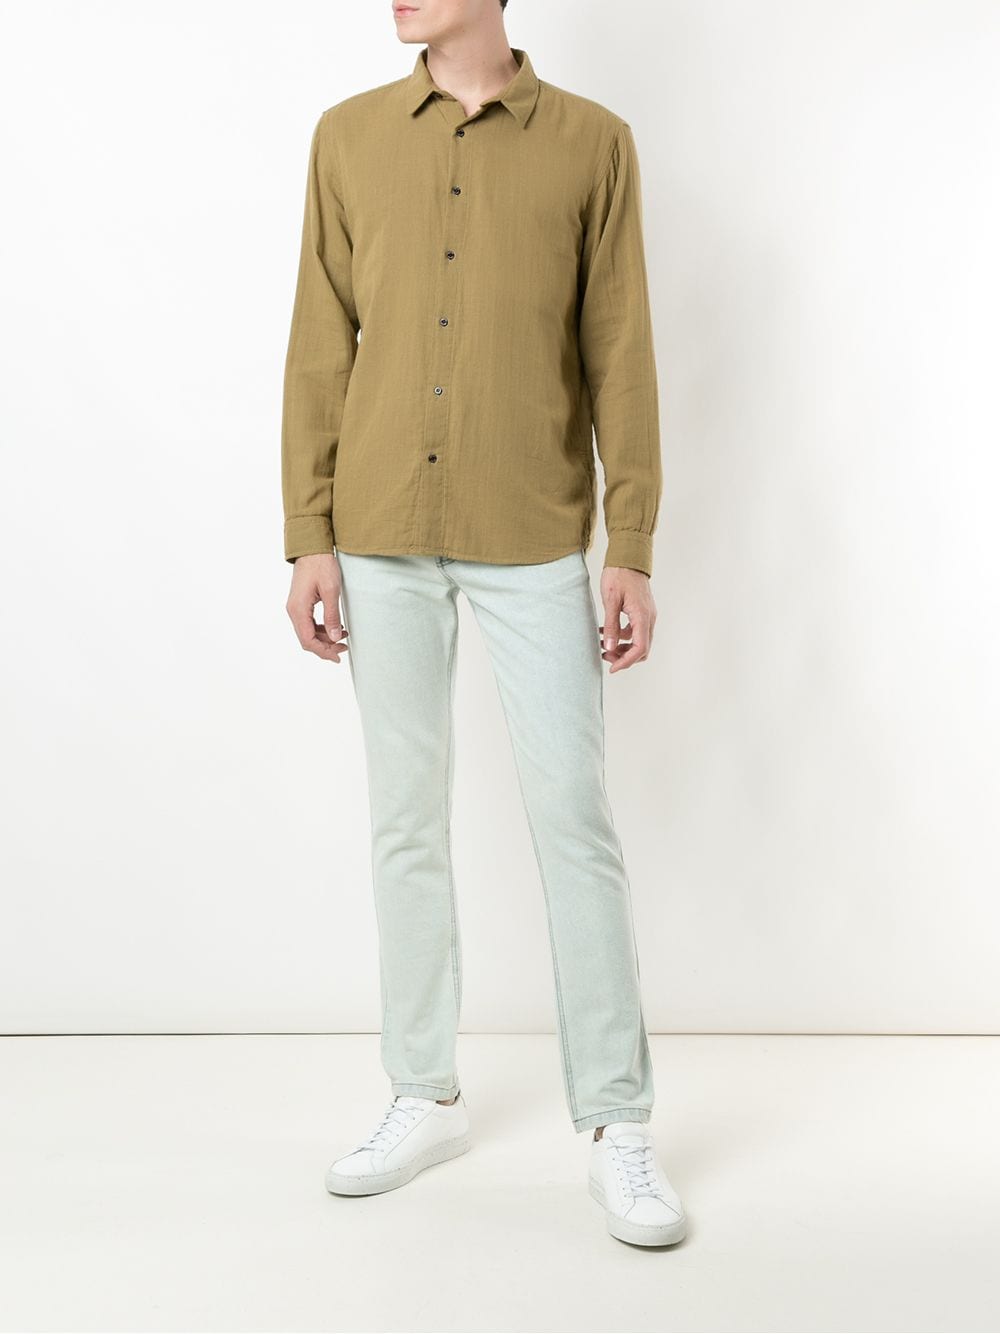 Shop Osklen Twin Gauze shirt with Express Delivery - FARFETCH